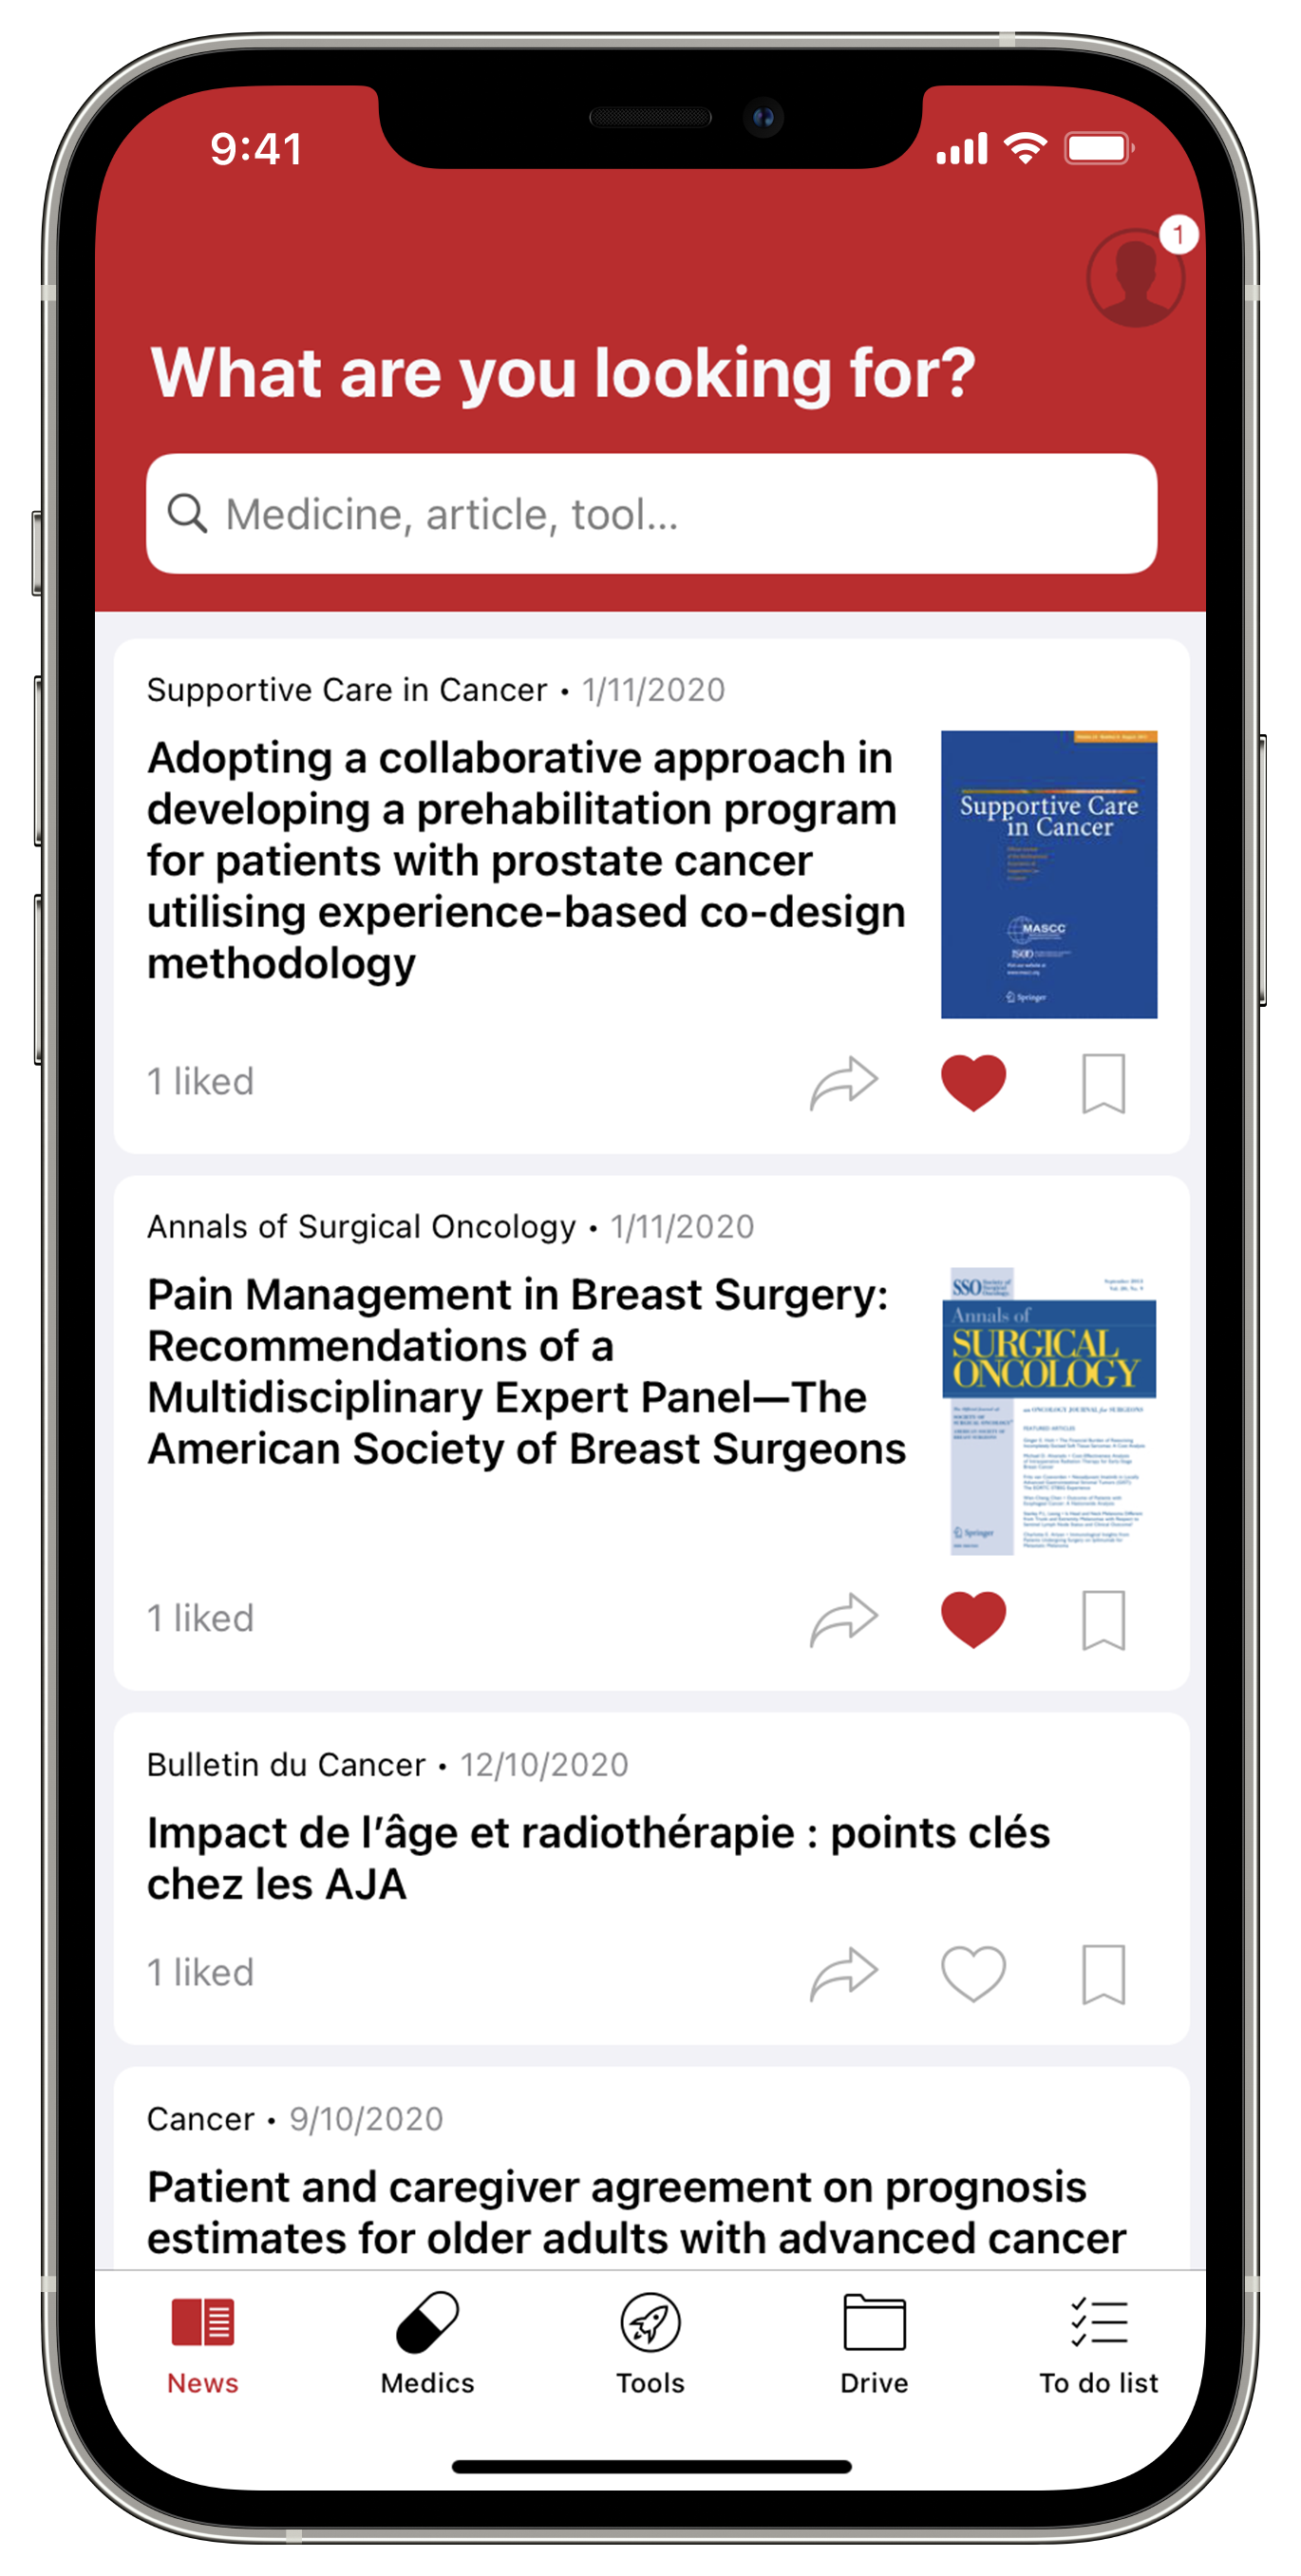 360 medics, a hyperspecialized and personalized news feed